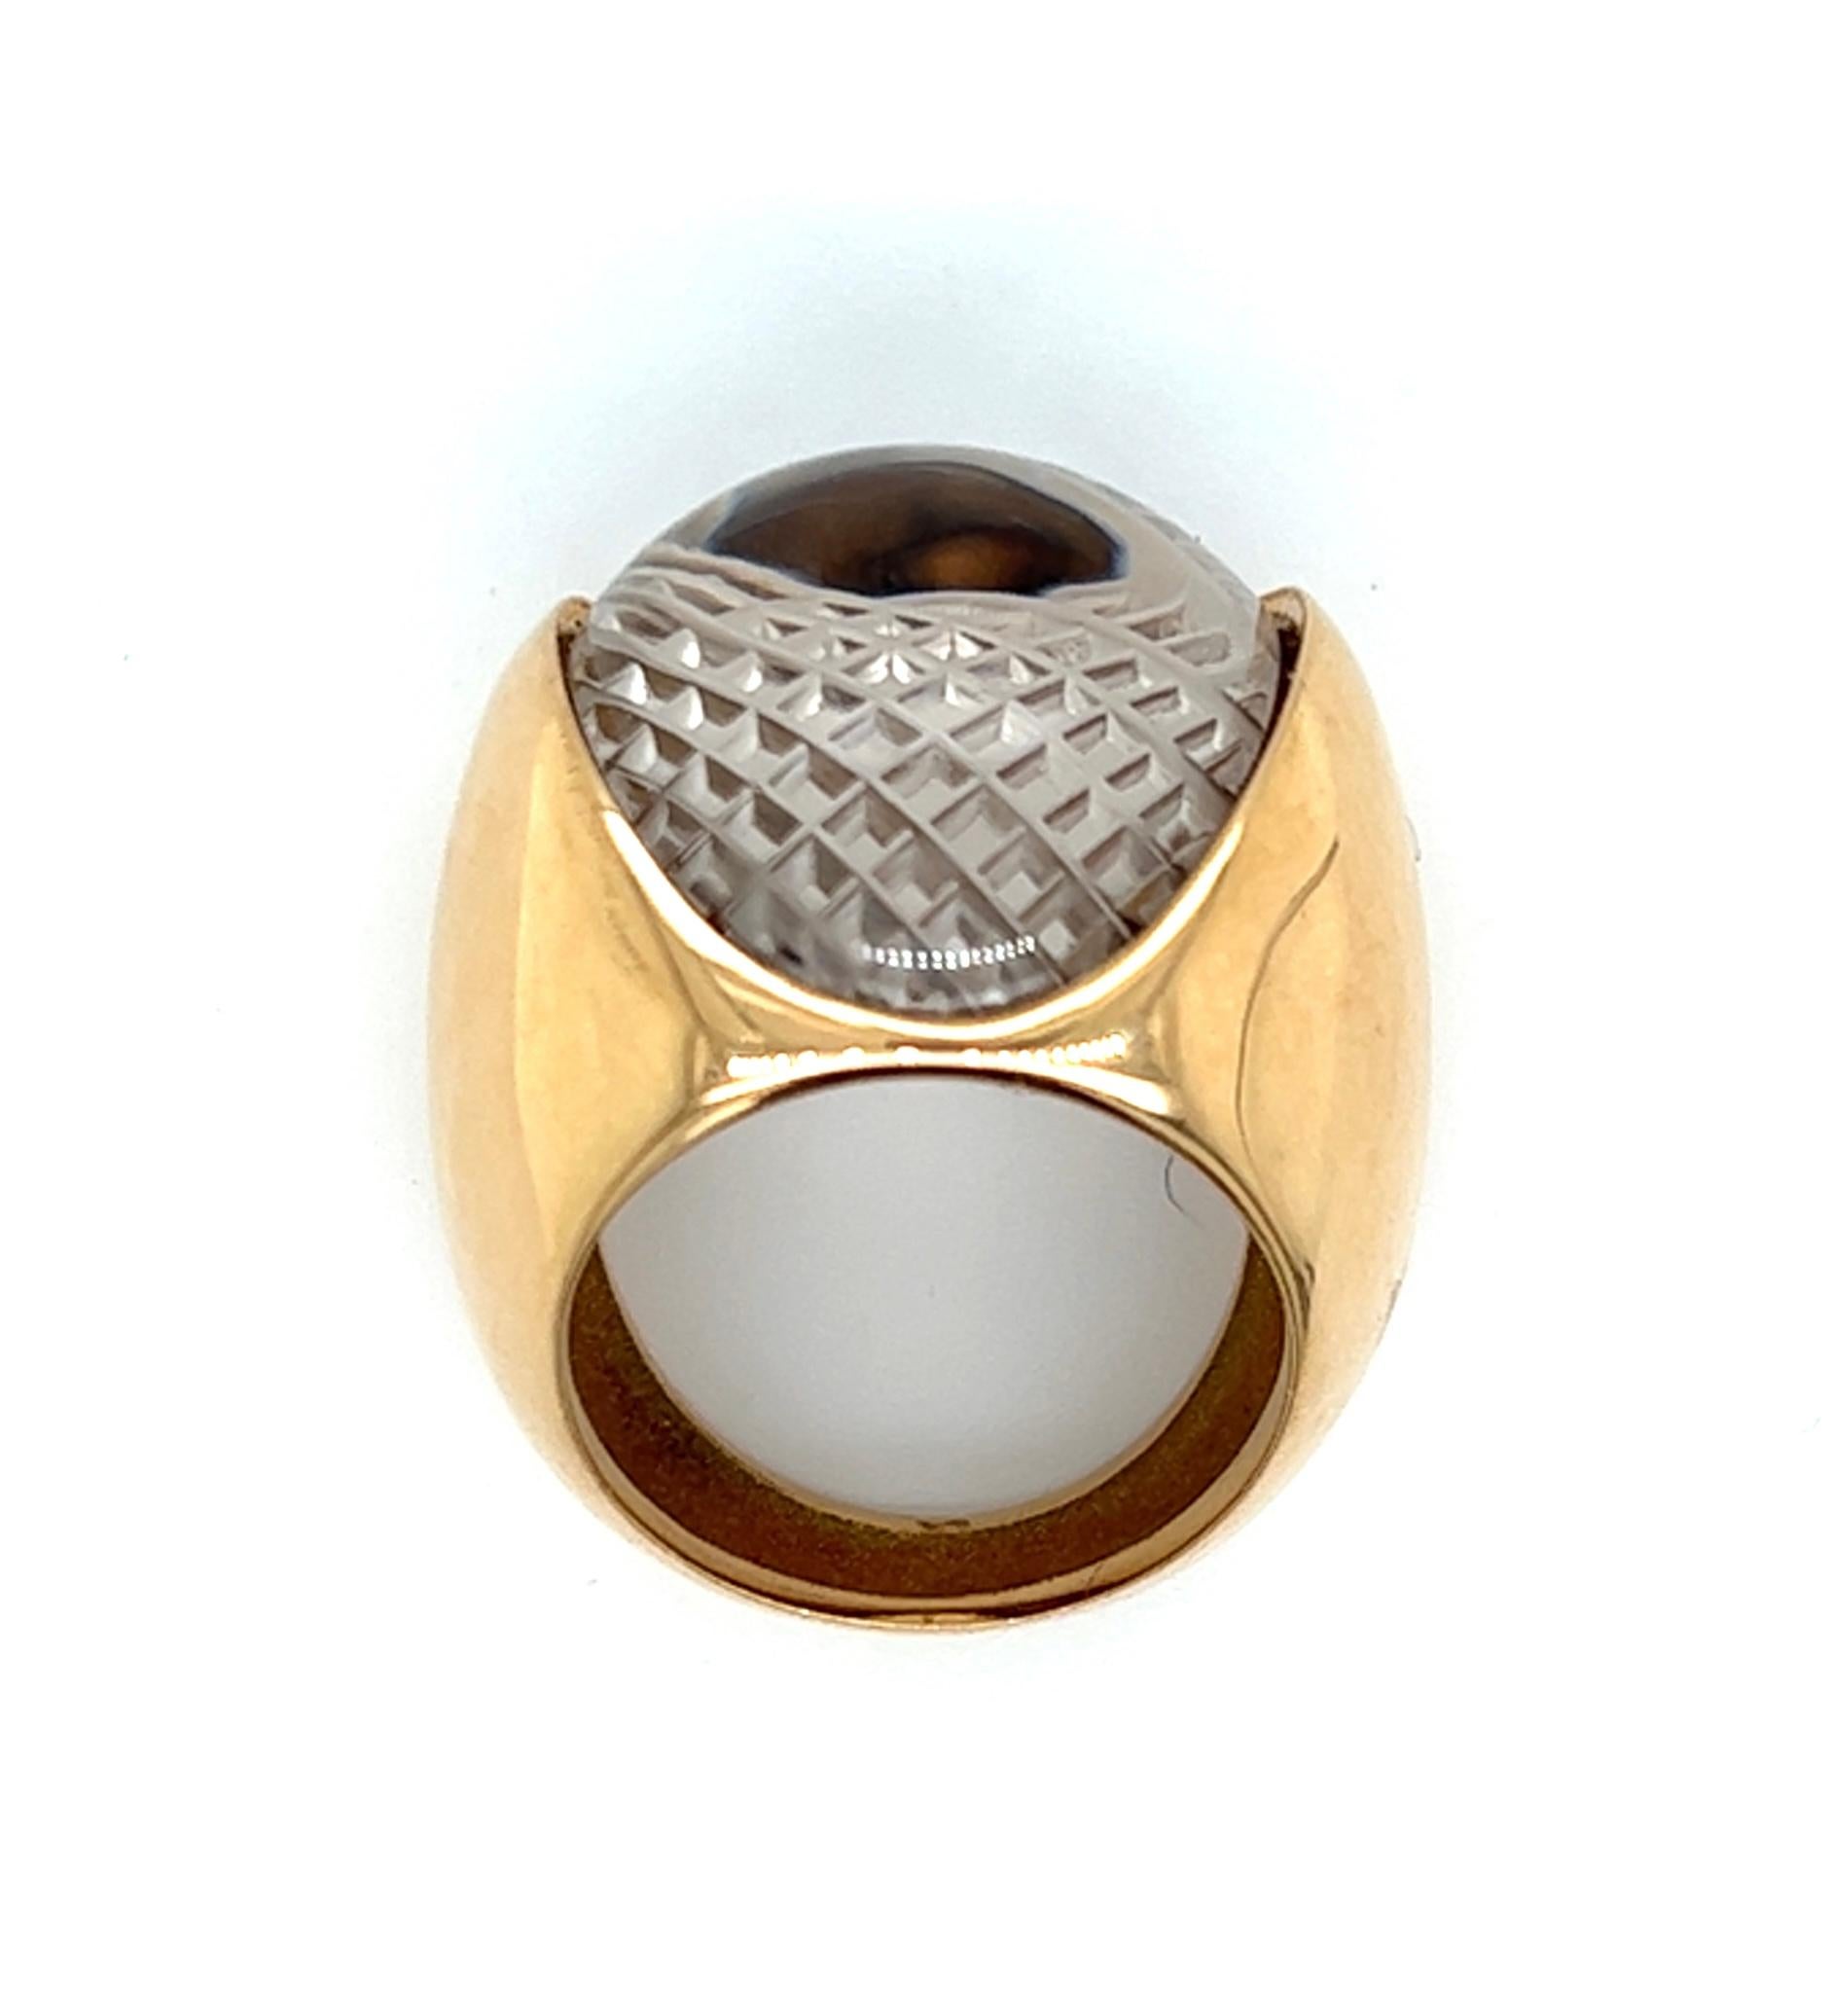 One carved rock crystal limited edition ring in 14 karat yellow gold is one of eight made of this design. The ring is stamped 